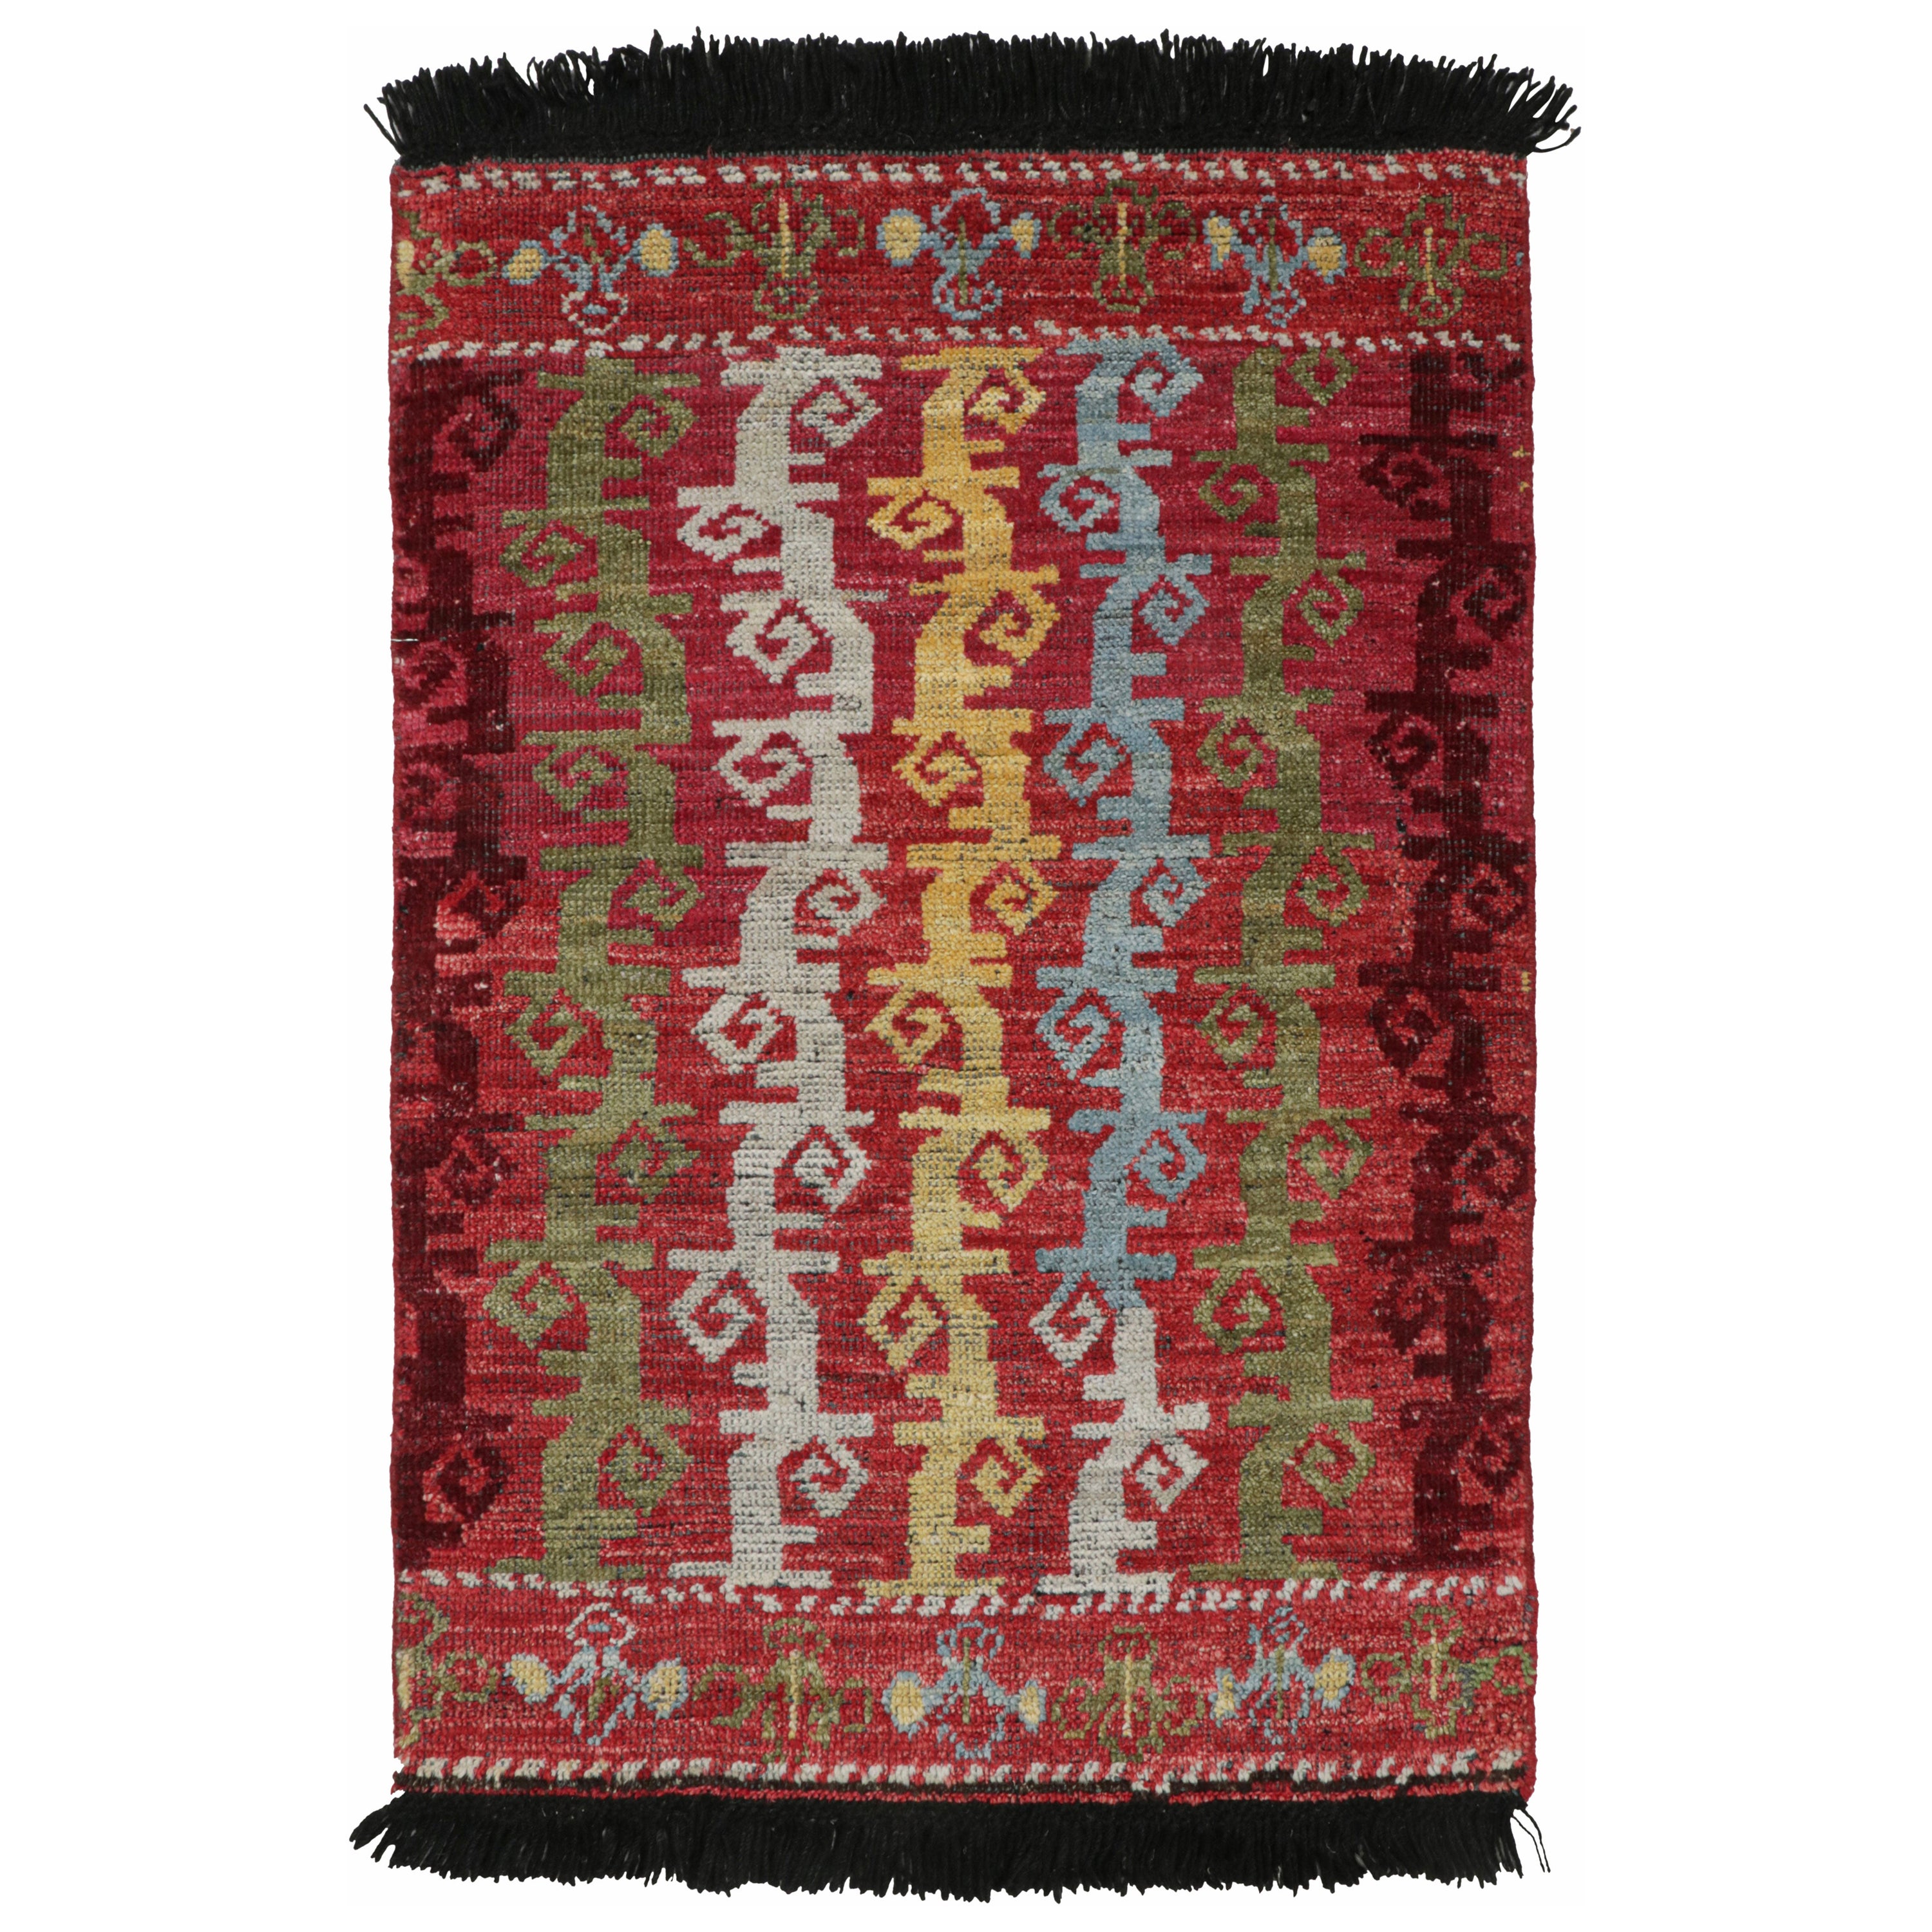 Rug & Kilim’s Caucasian Tribal Rug in Red with Vine Scroll Pictorials 